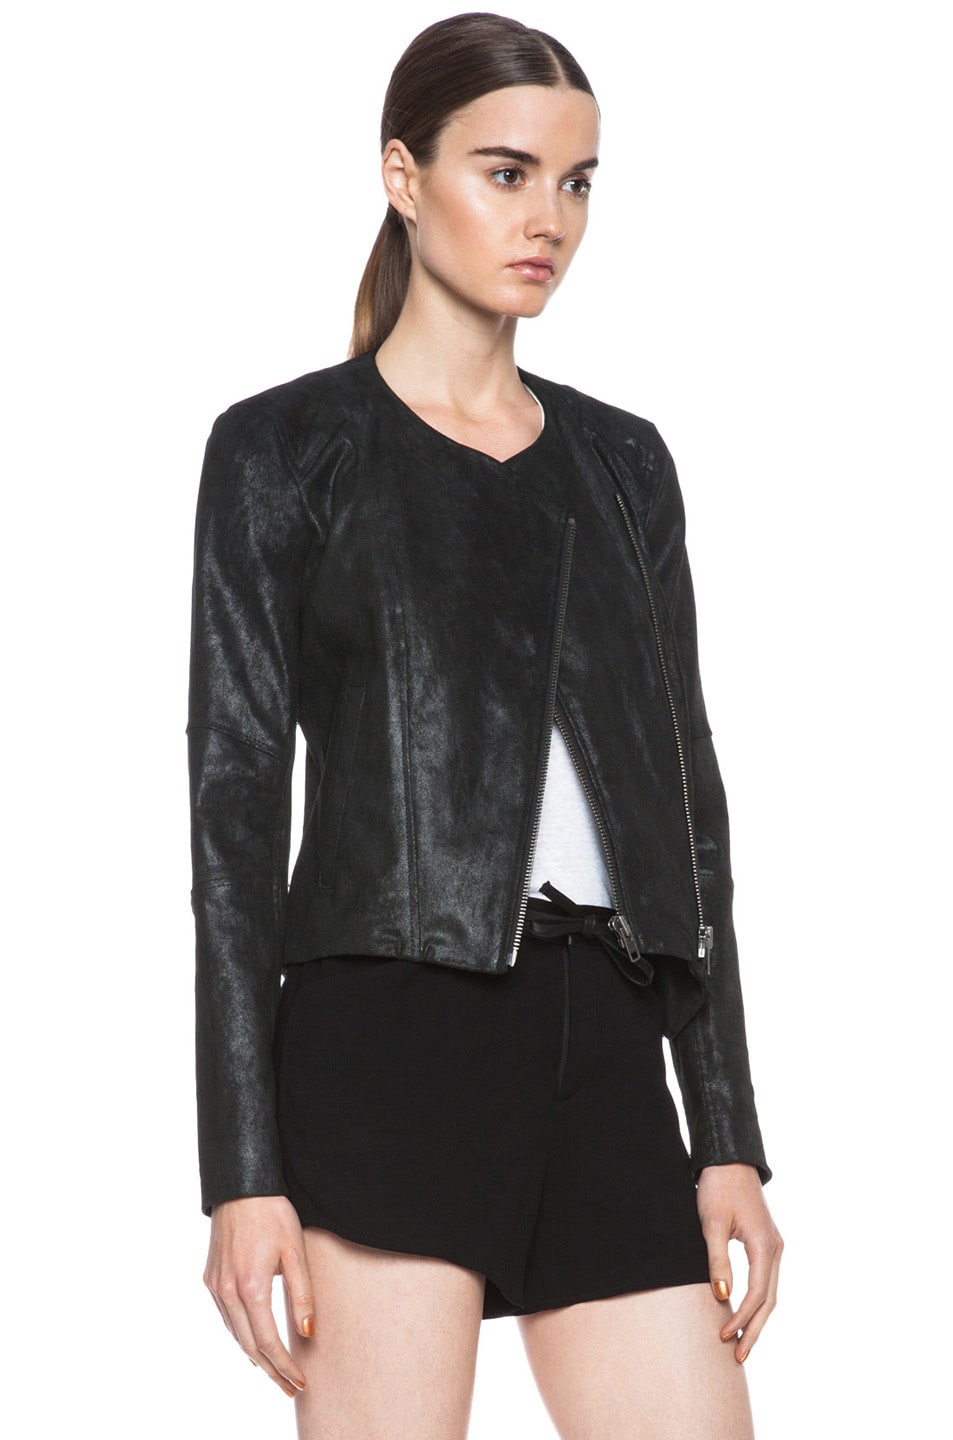 Helmut Lang Patina Cropped Leather Jacket in Bismuth | FWRD